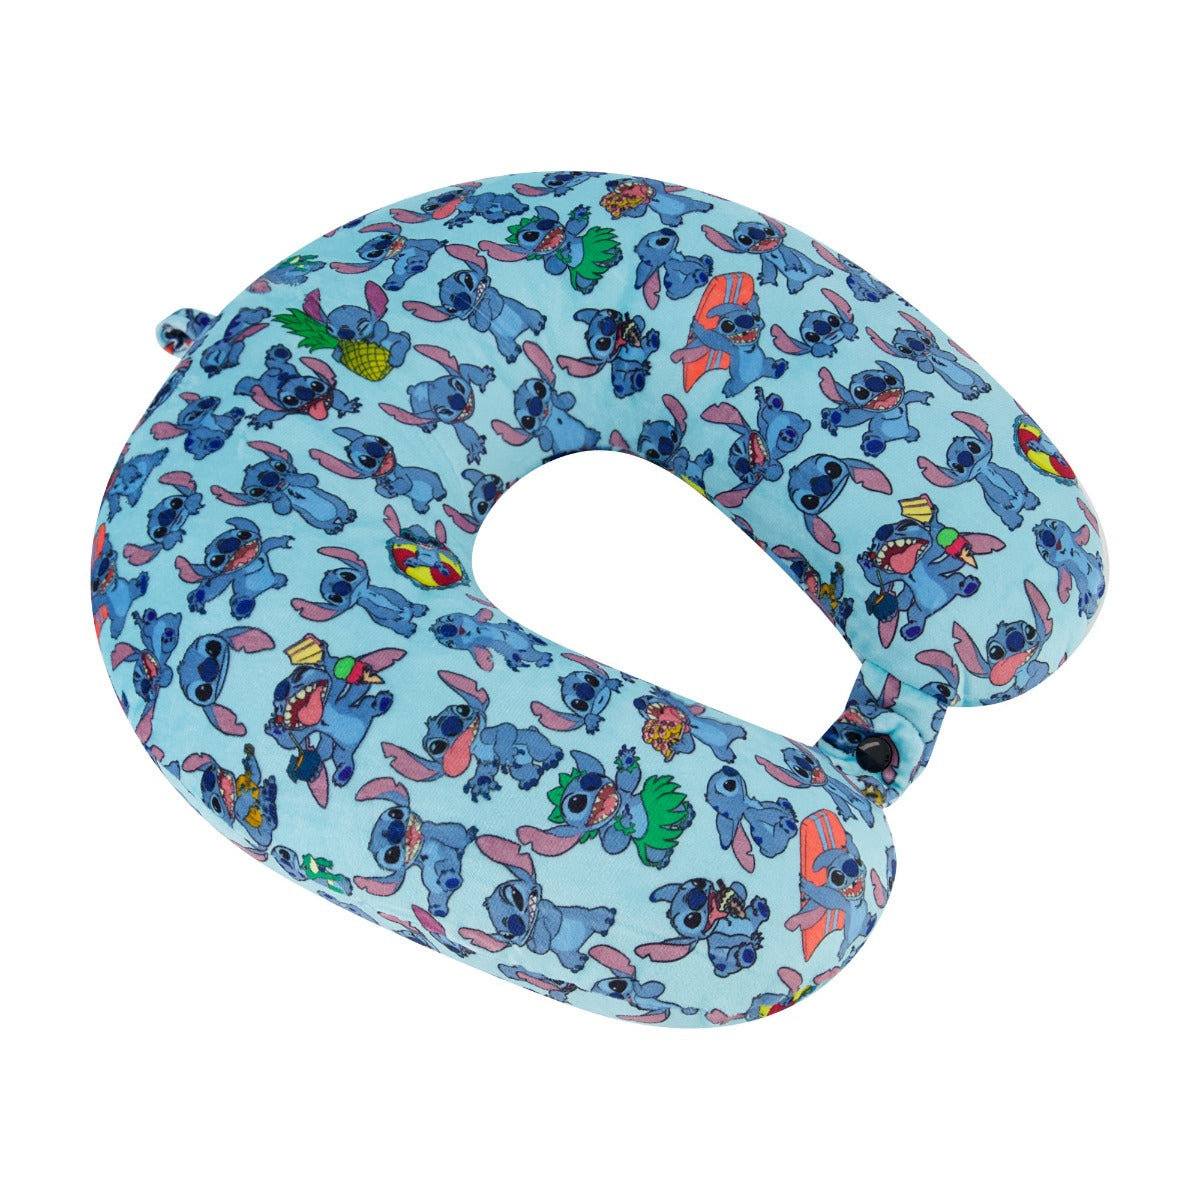 Stitch kids neck pillow with button closure in light blue - kids supportive travelling neck pillows